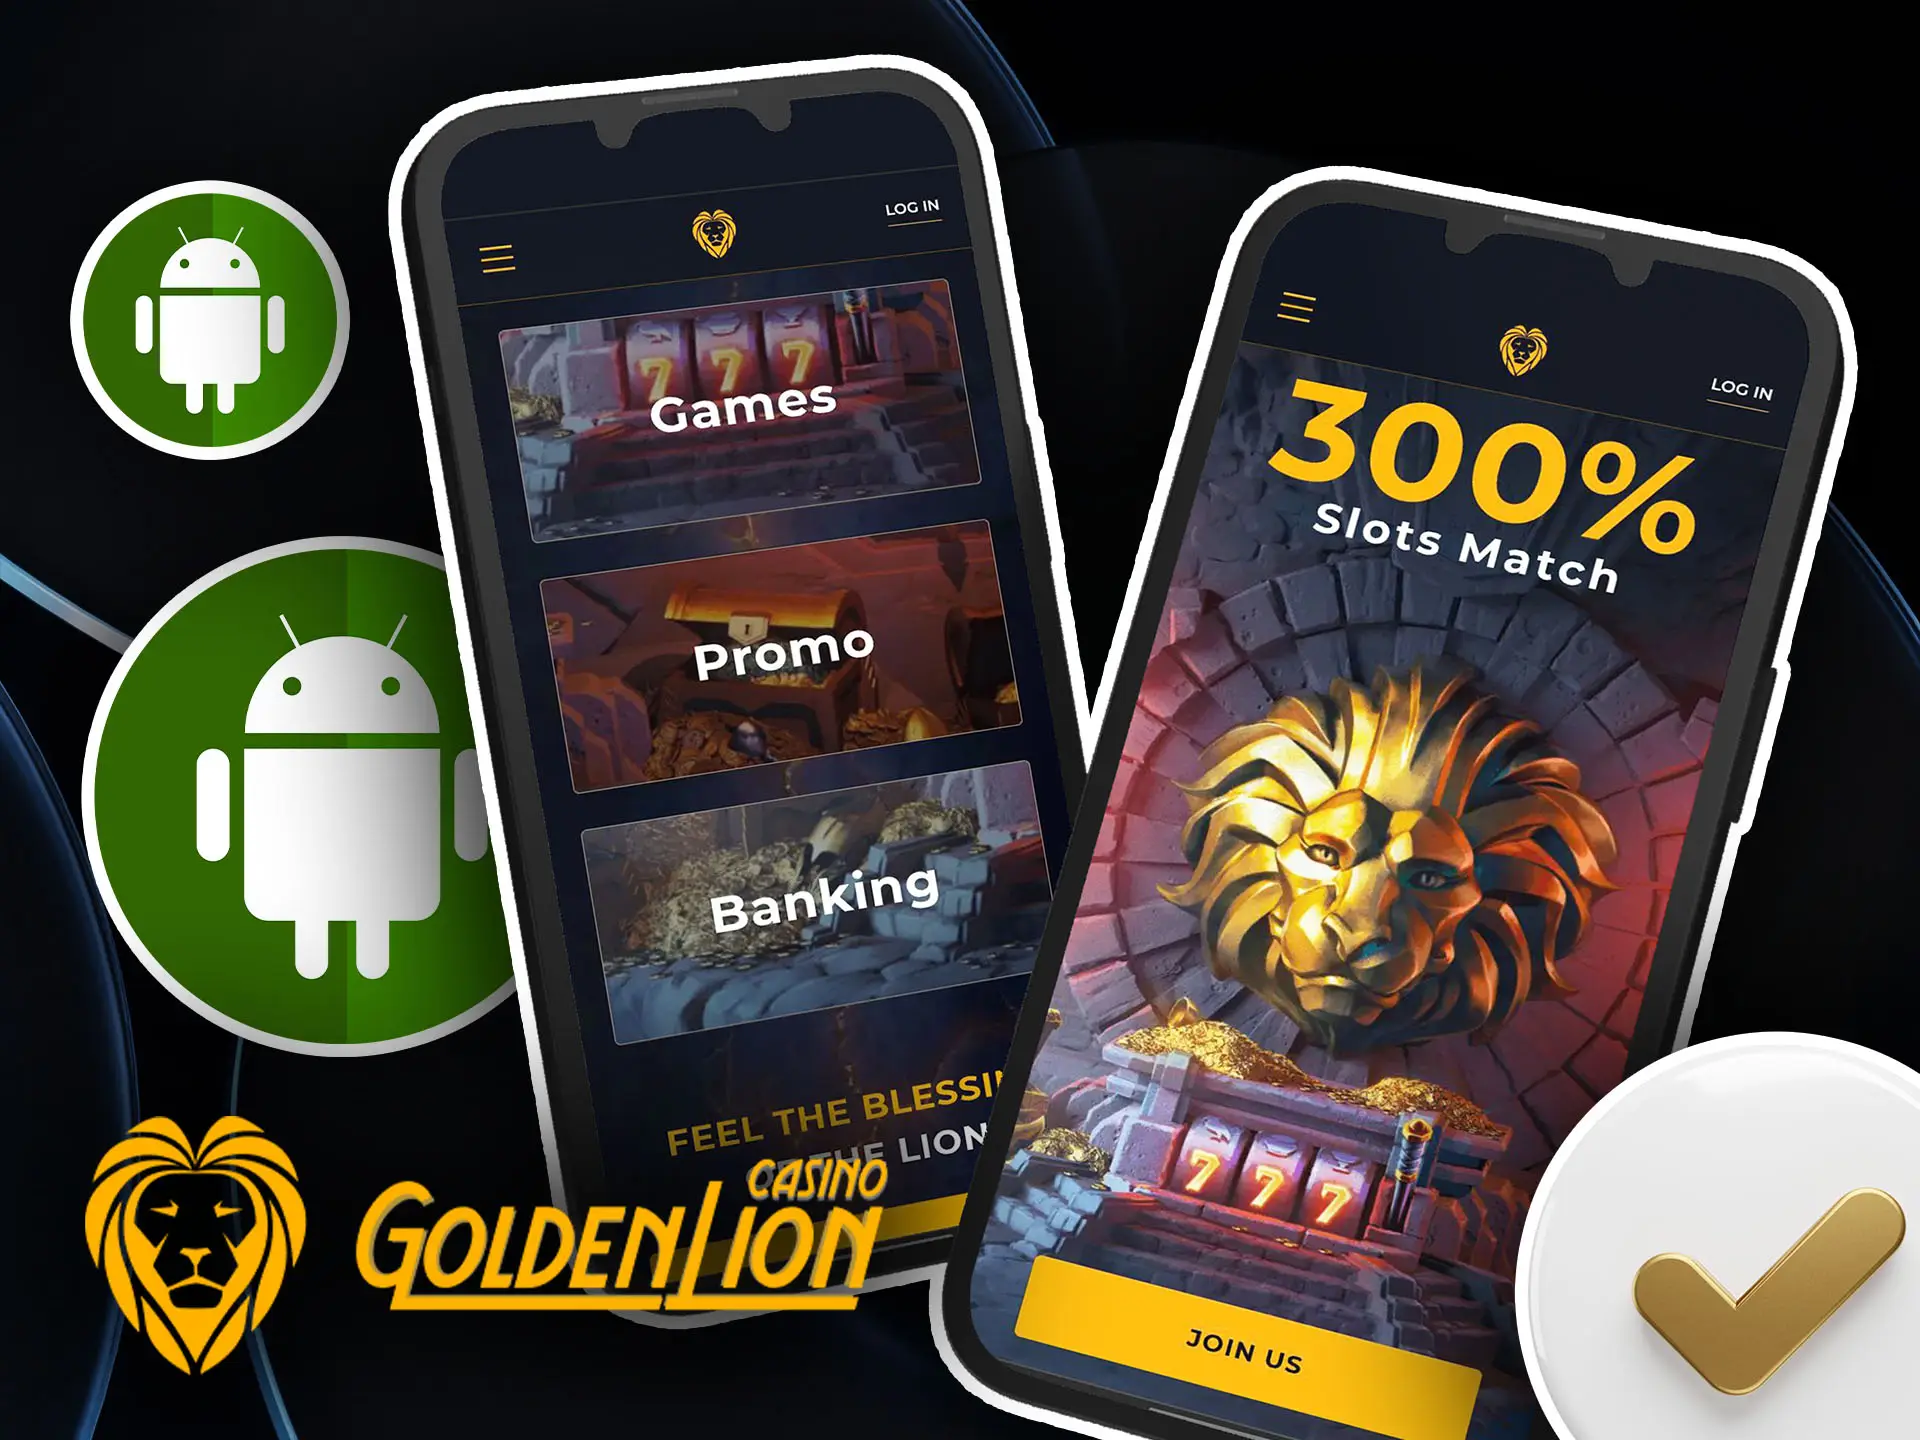 Golden Lion Casino application for android.